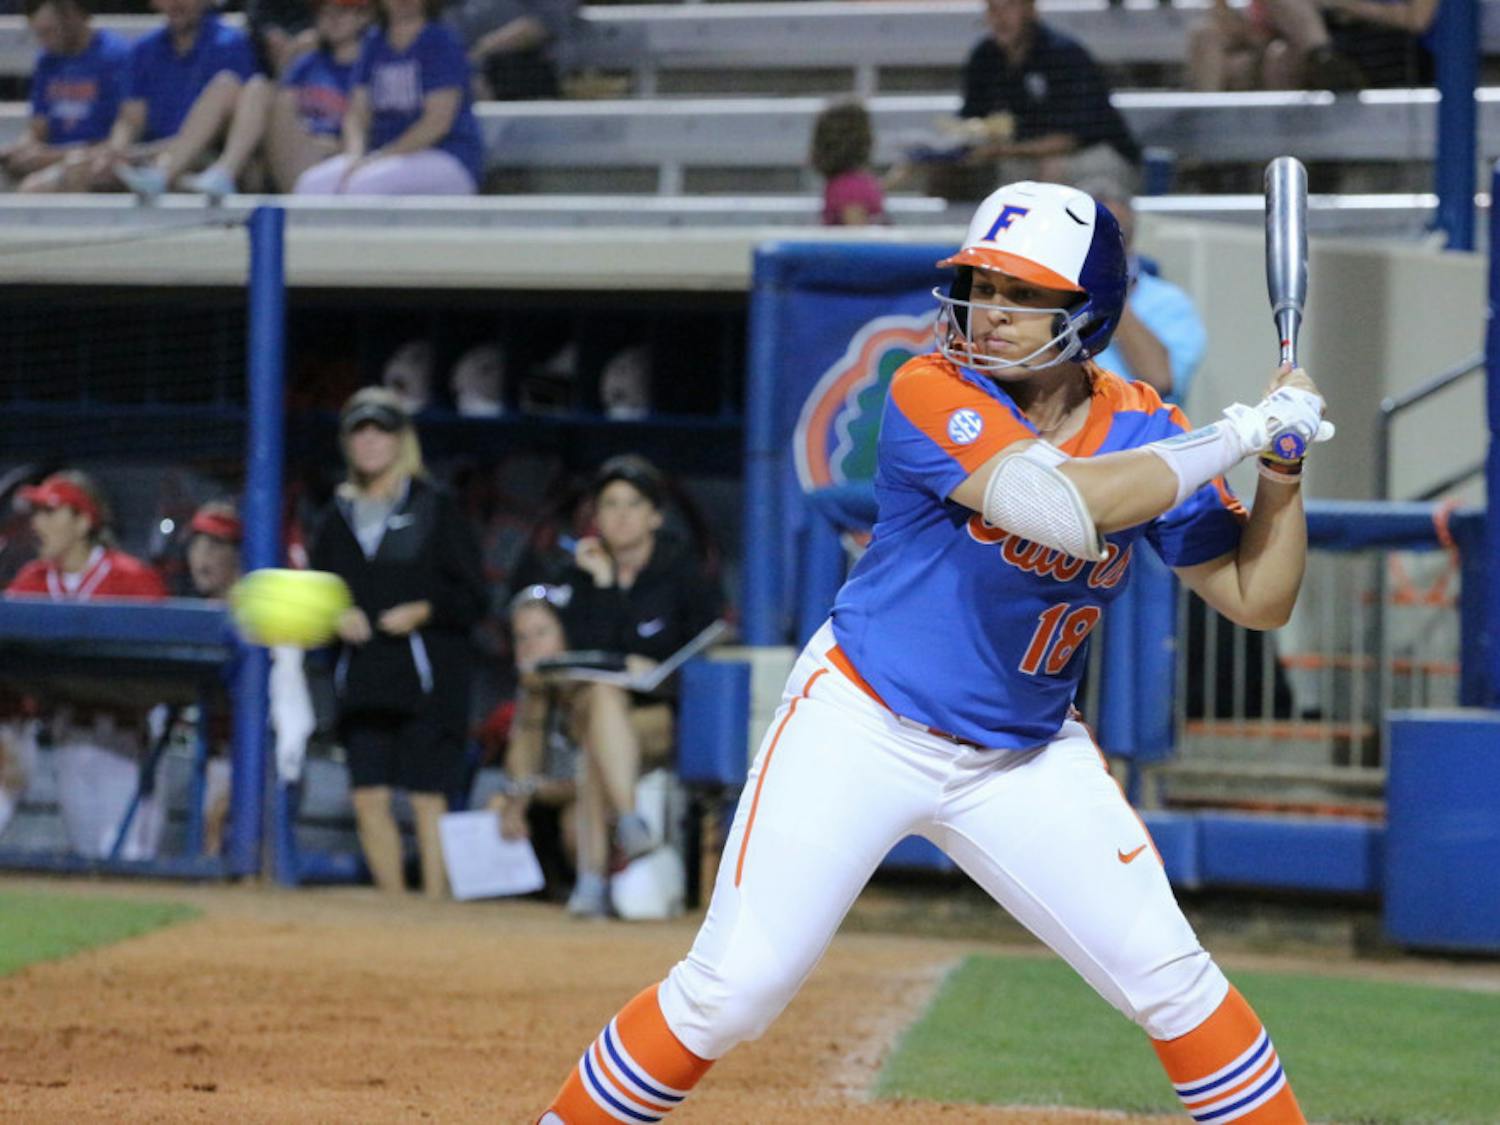 Senior Amanda Lorenz returns to the Gators 2019 lineup after winning 2018 SEC Player of the Year and SEC Tournament Most Valuable Player honors.